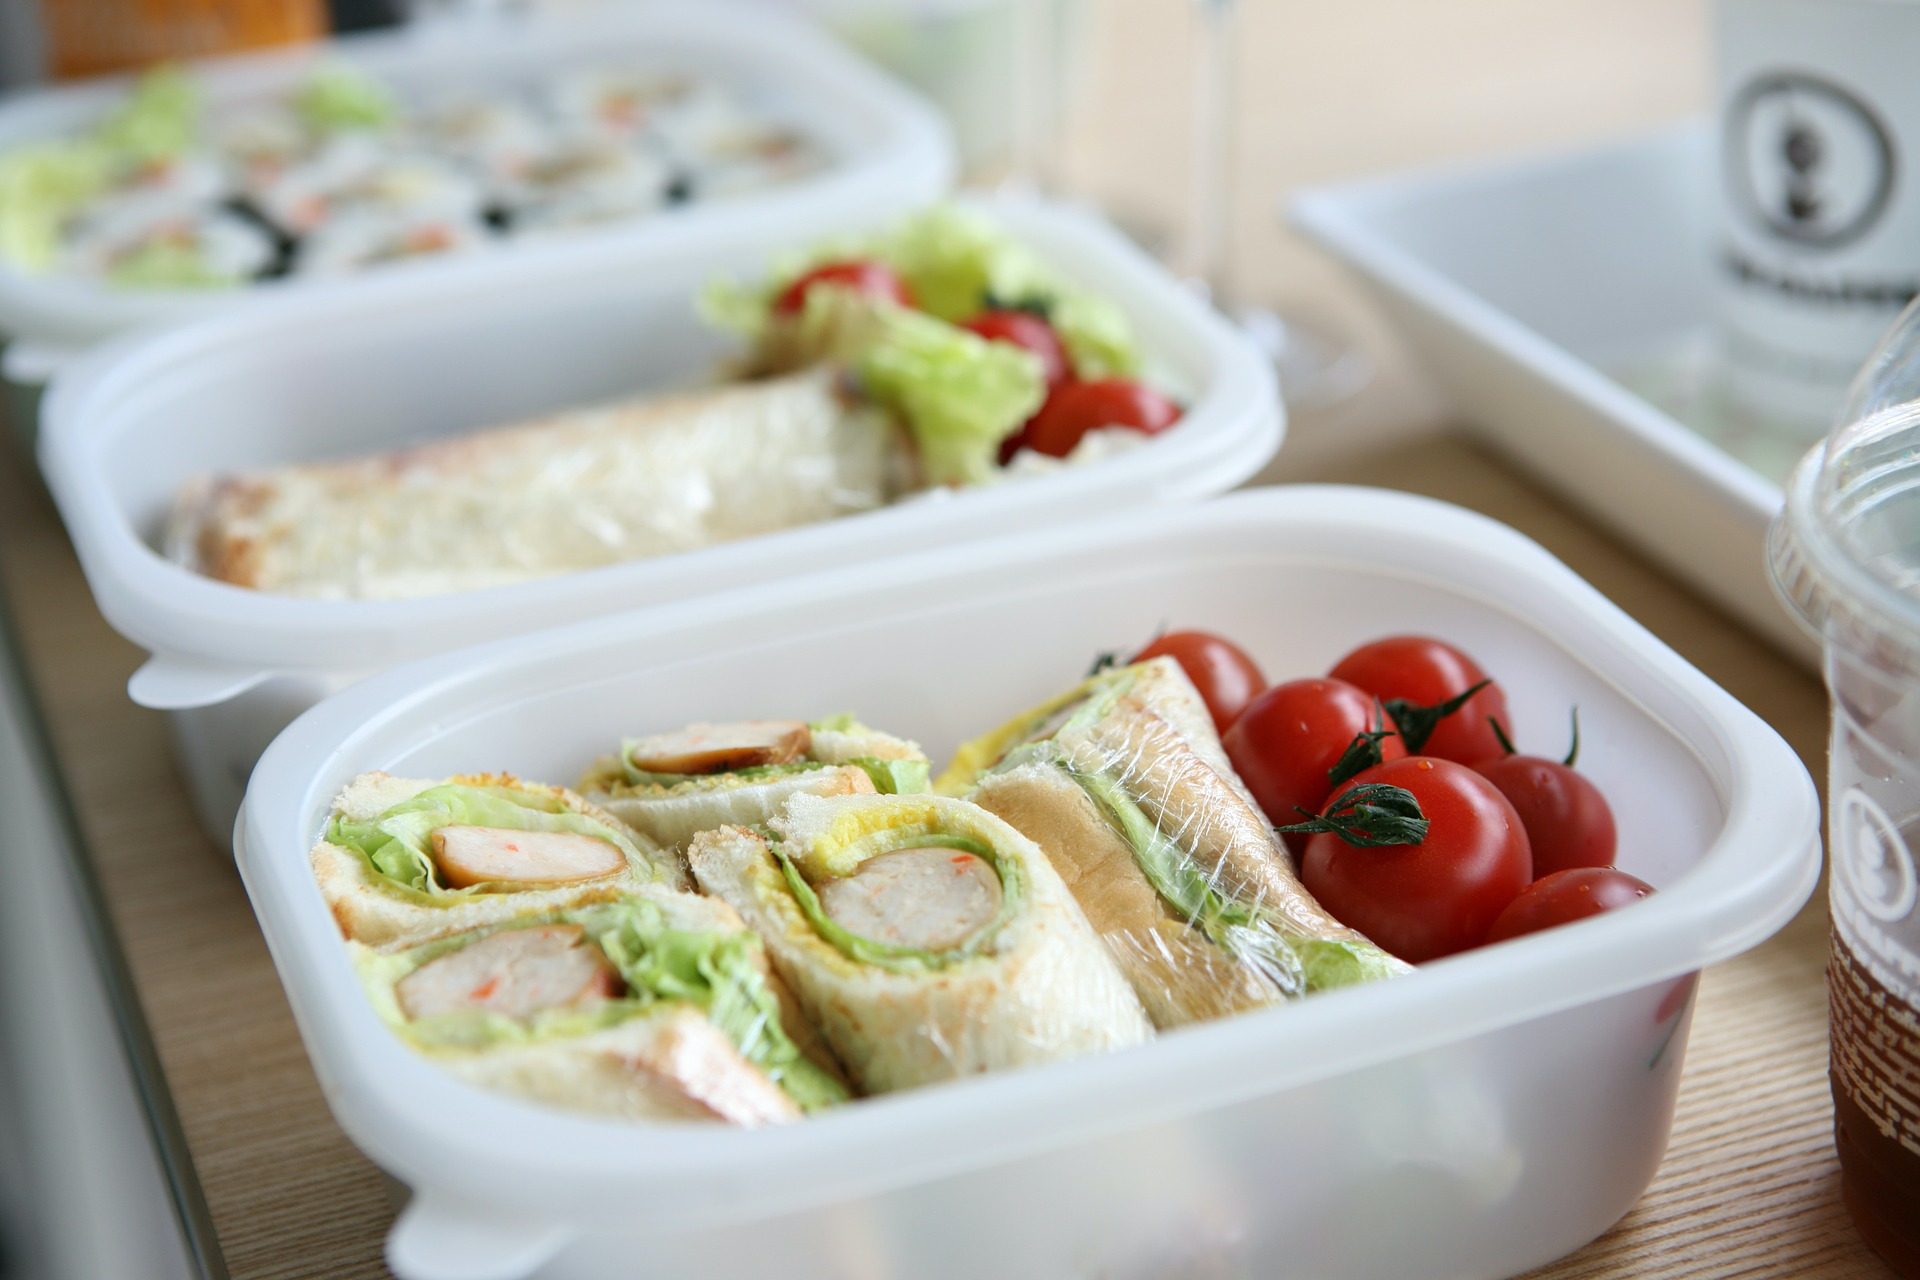 On The Go Lunch And Snacks Day After Day? Prep Tips For The Win